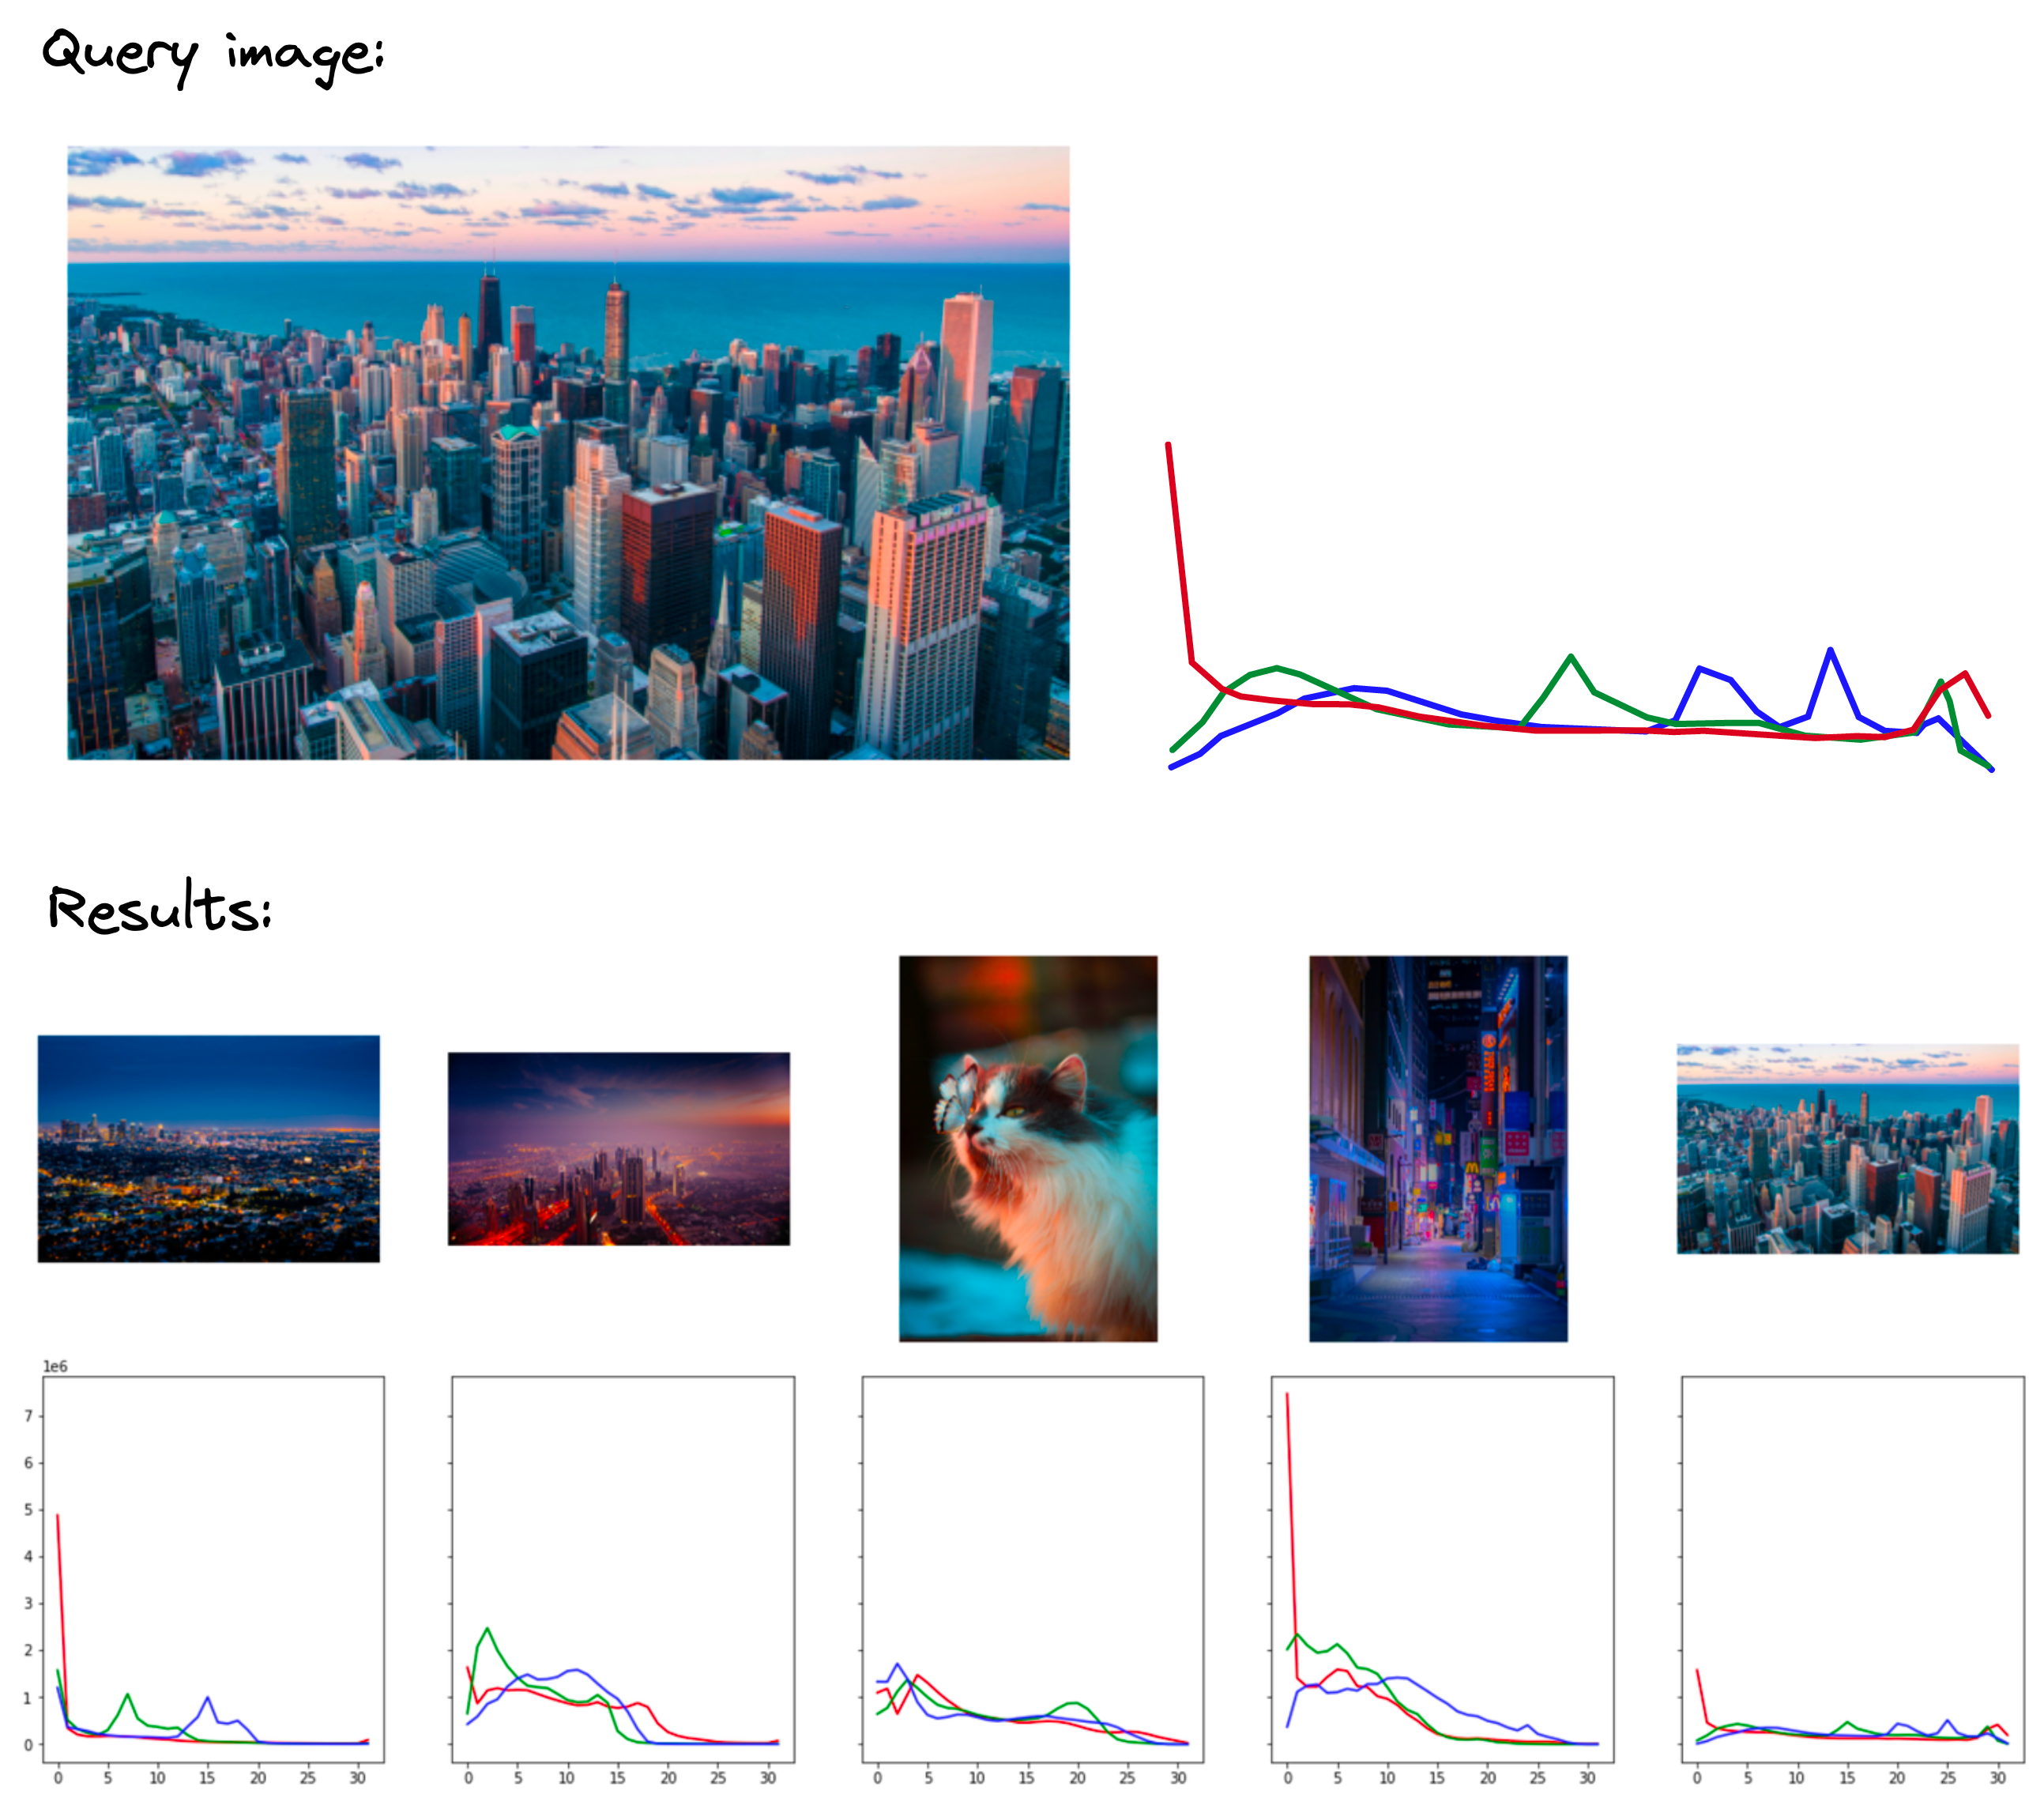 Using the top query image we return the top five most similar images (including the same image) based on their color profiles.